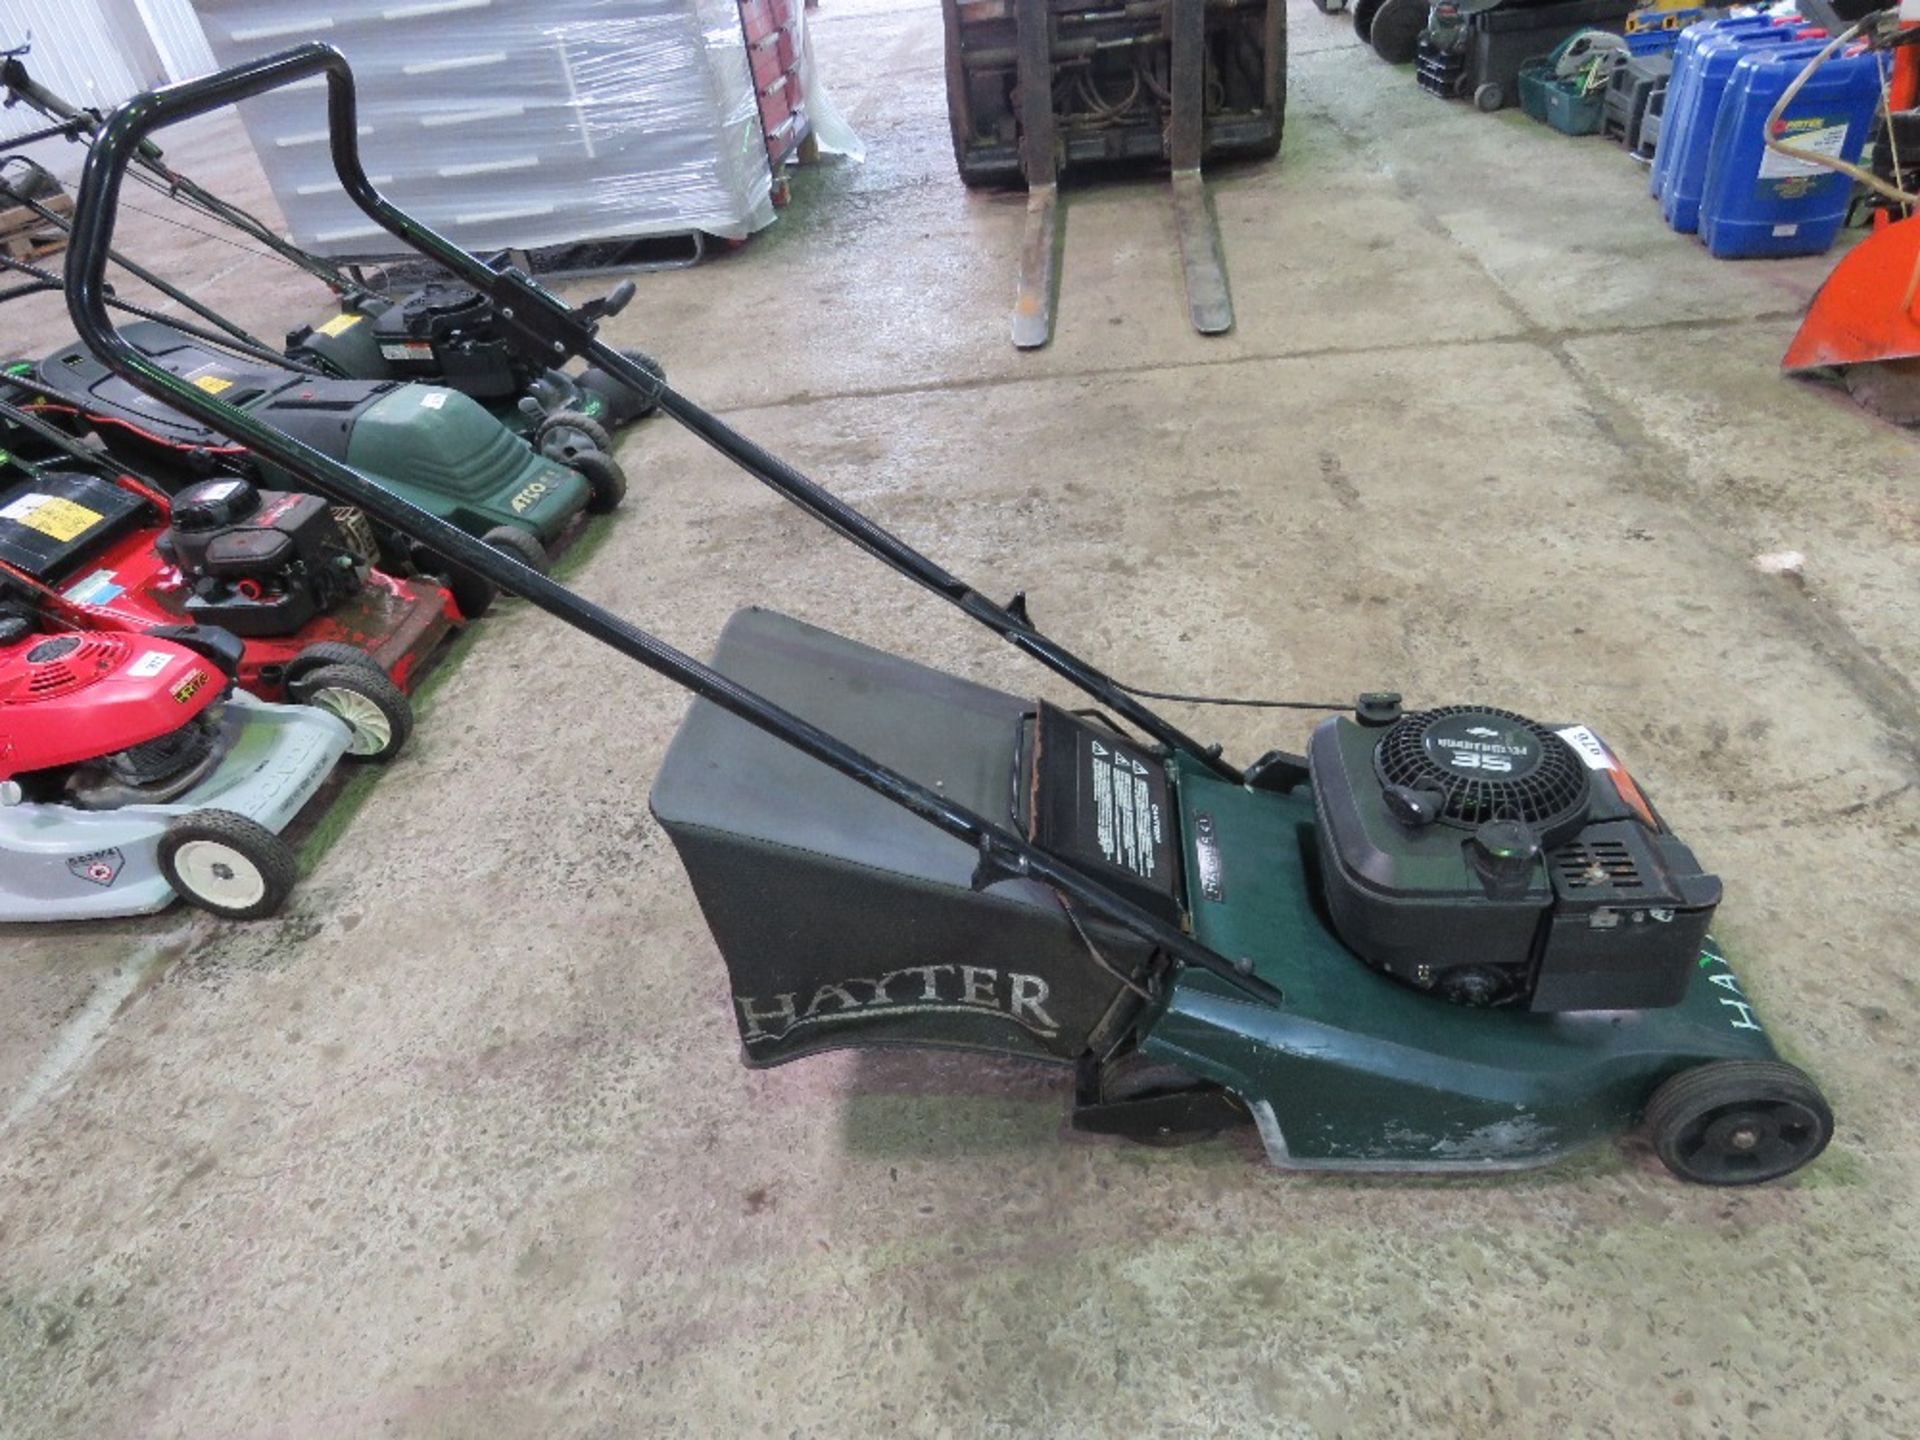 HARRIER 41 MOWER WITH A COLLECTOR. THIS LOT IS SOLD UNDER THE AUCTIONEERS MARGIN SCHEME, THEREFORE N